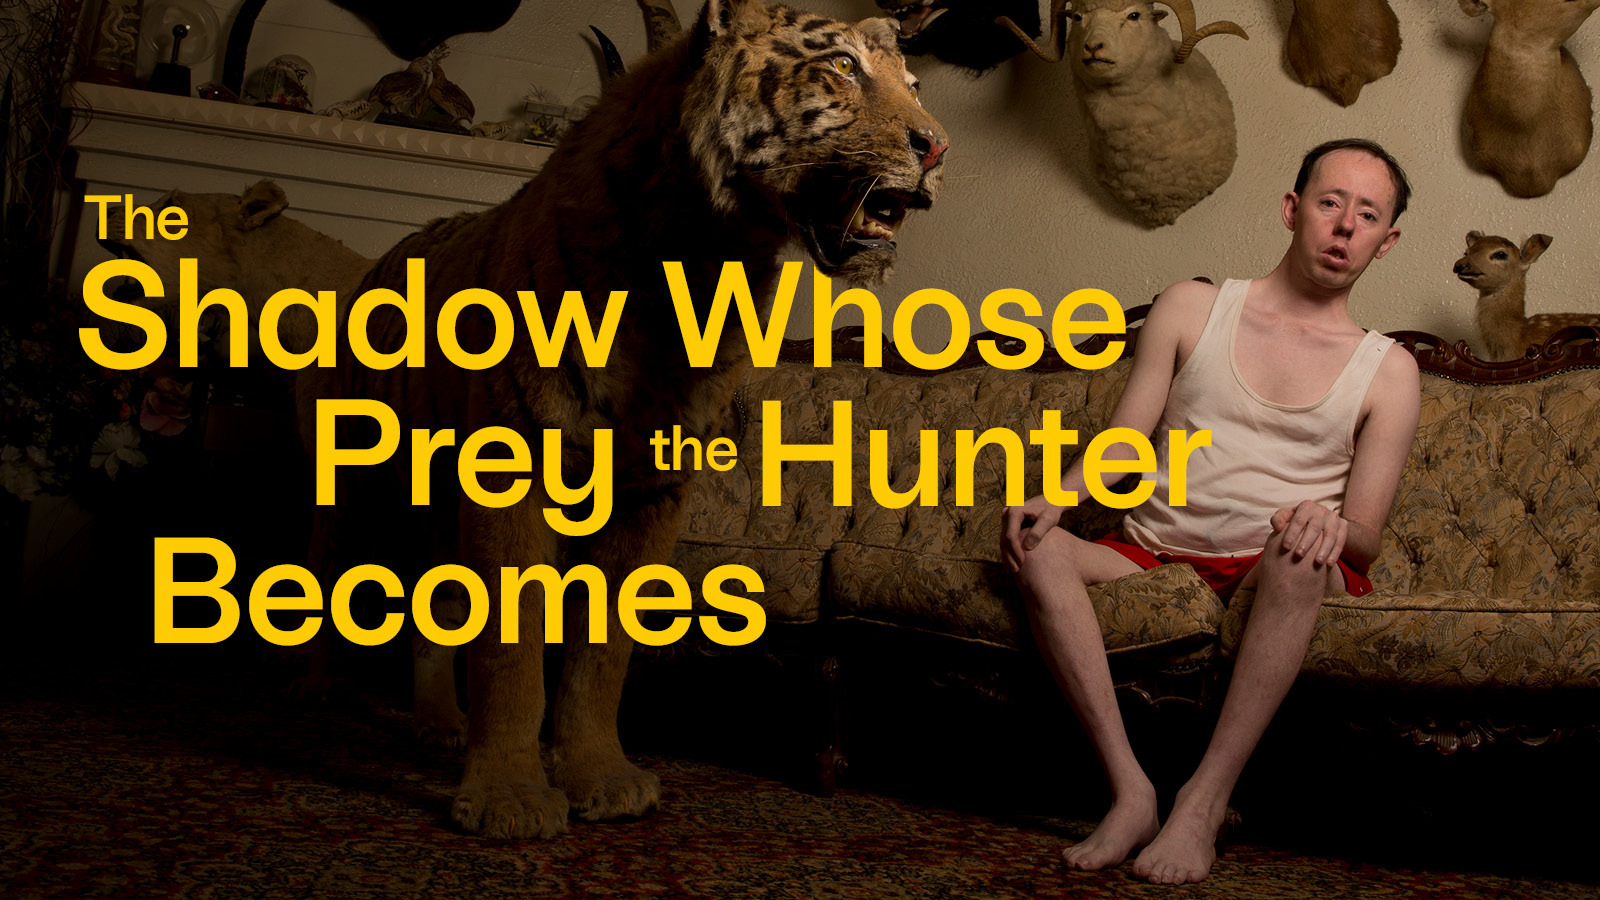 A wall filled with taxidermy including a bighorn sheep, a deer and a tiger with a person wearing a white tank top and red shorts, sitting on a floral sofa leaning to the left. Yellow text: 